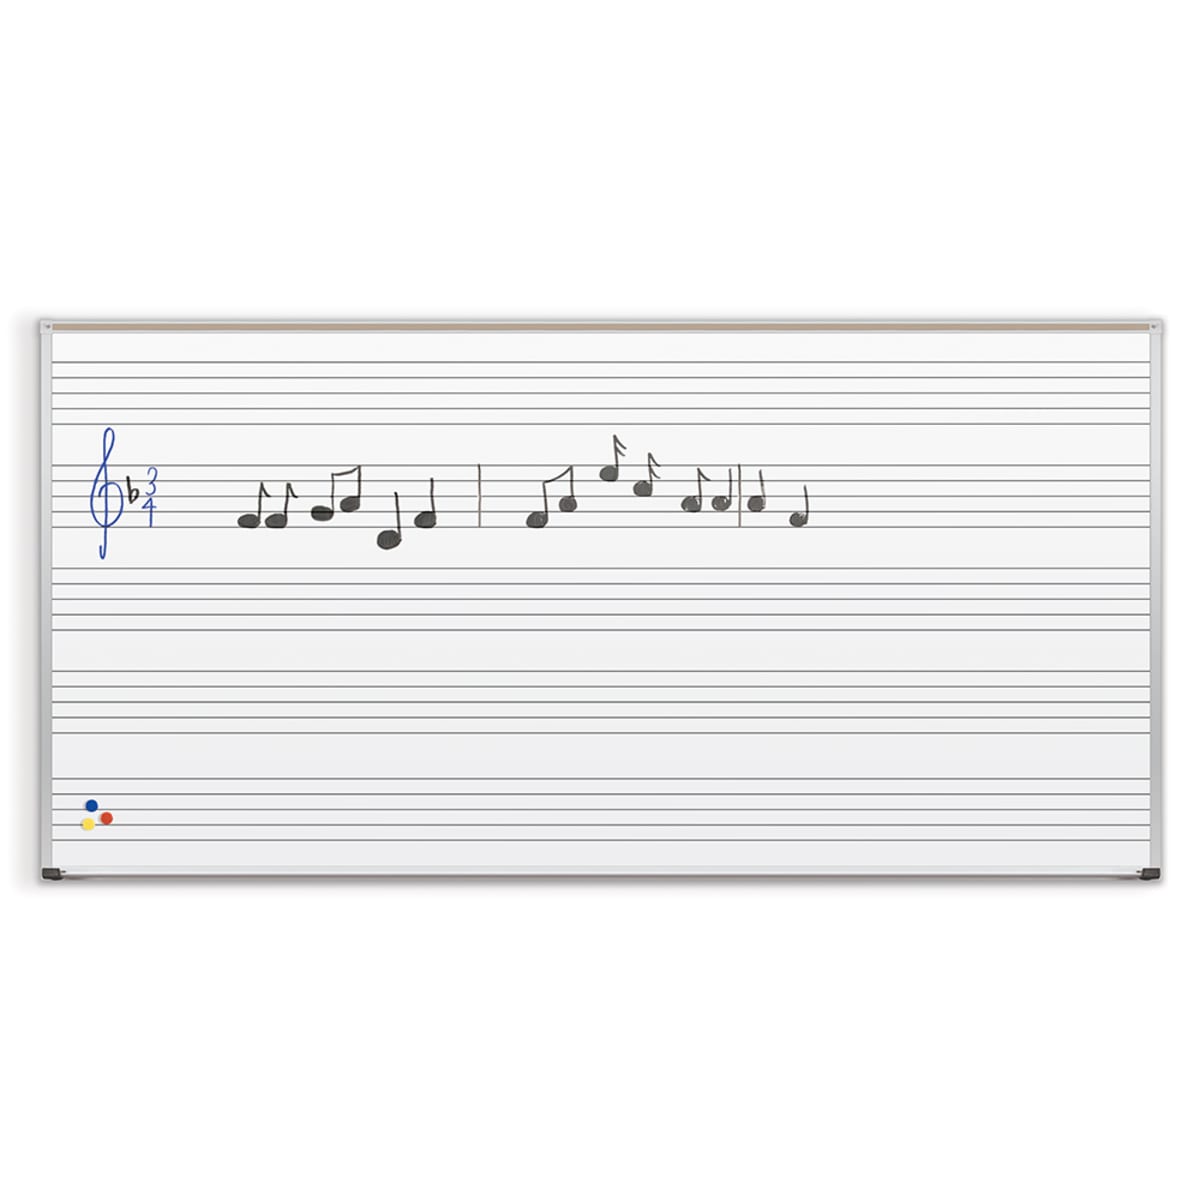 Mooreco - Porcelain Markerboard with Music Line - Aluminum Trim - 4'H x 6'W (Mooreco 202AG-S1) - SchoolOutlet